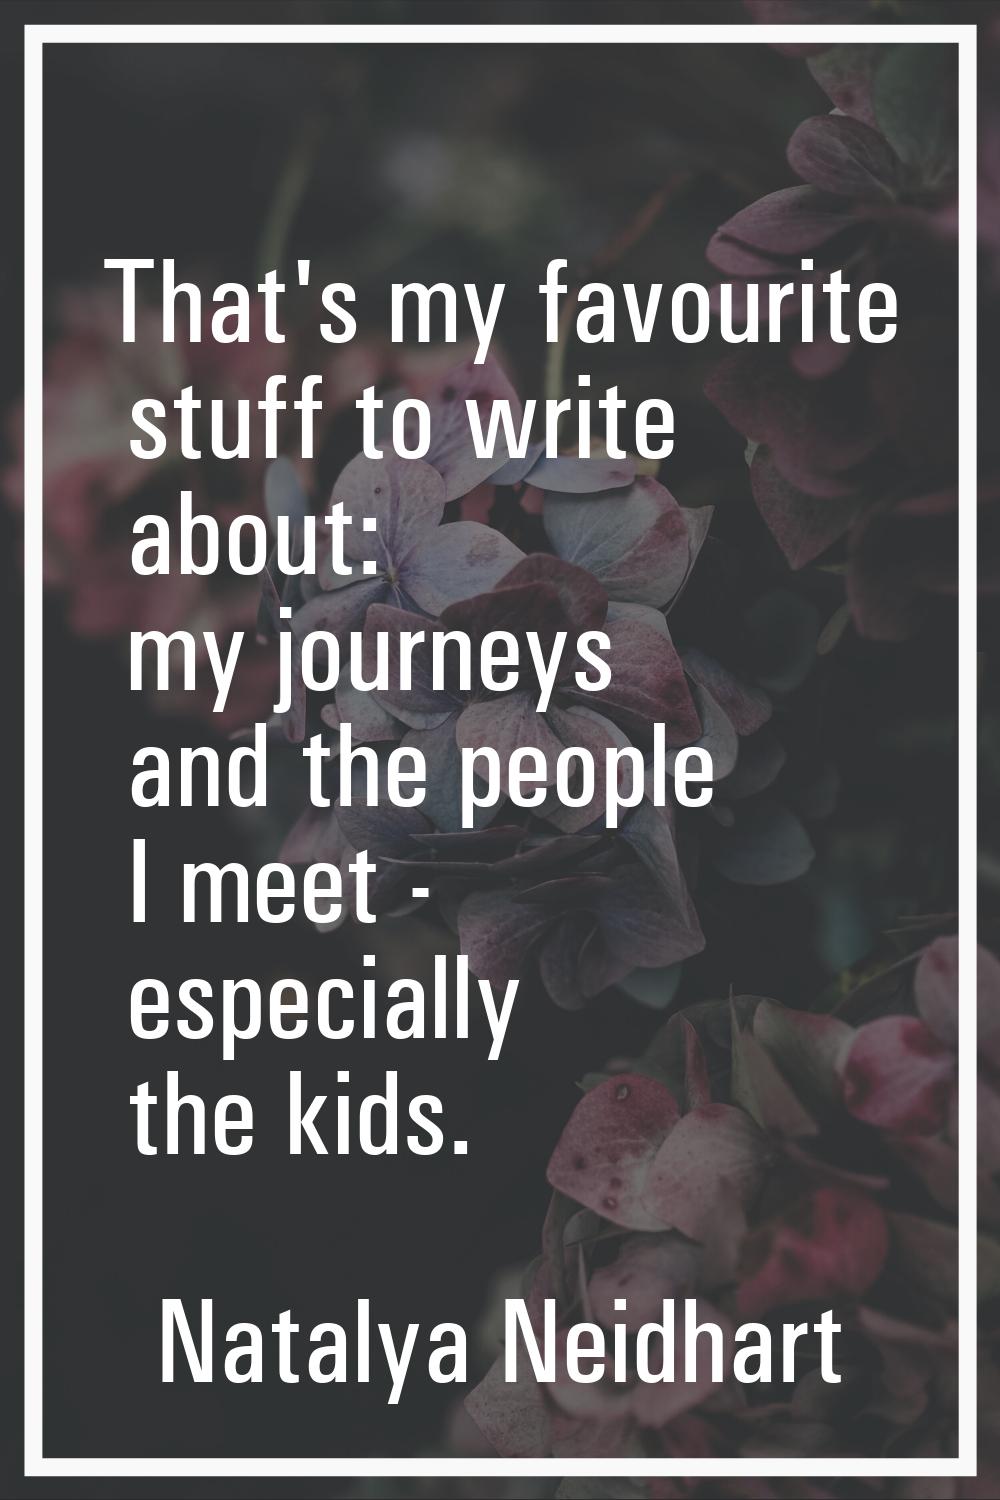 That's my favourite stuff to write about: my journeys and the people I meet - especially the kids.